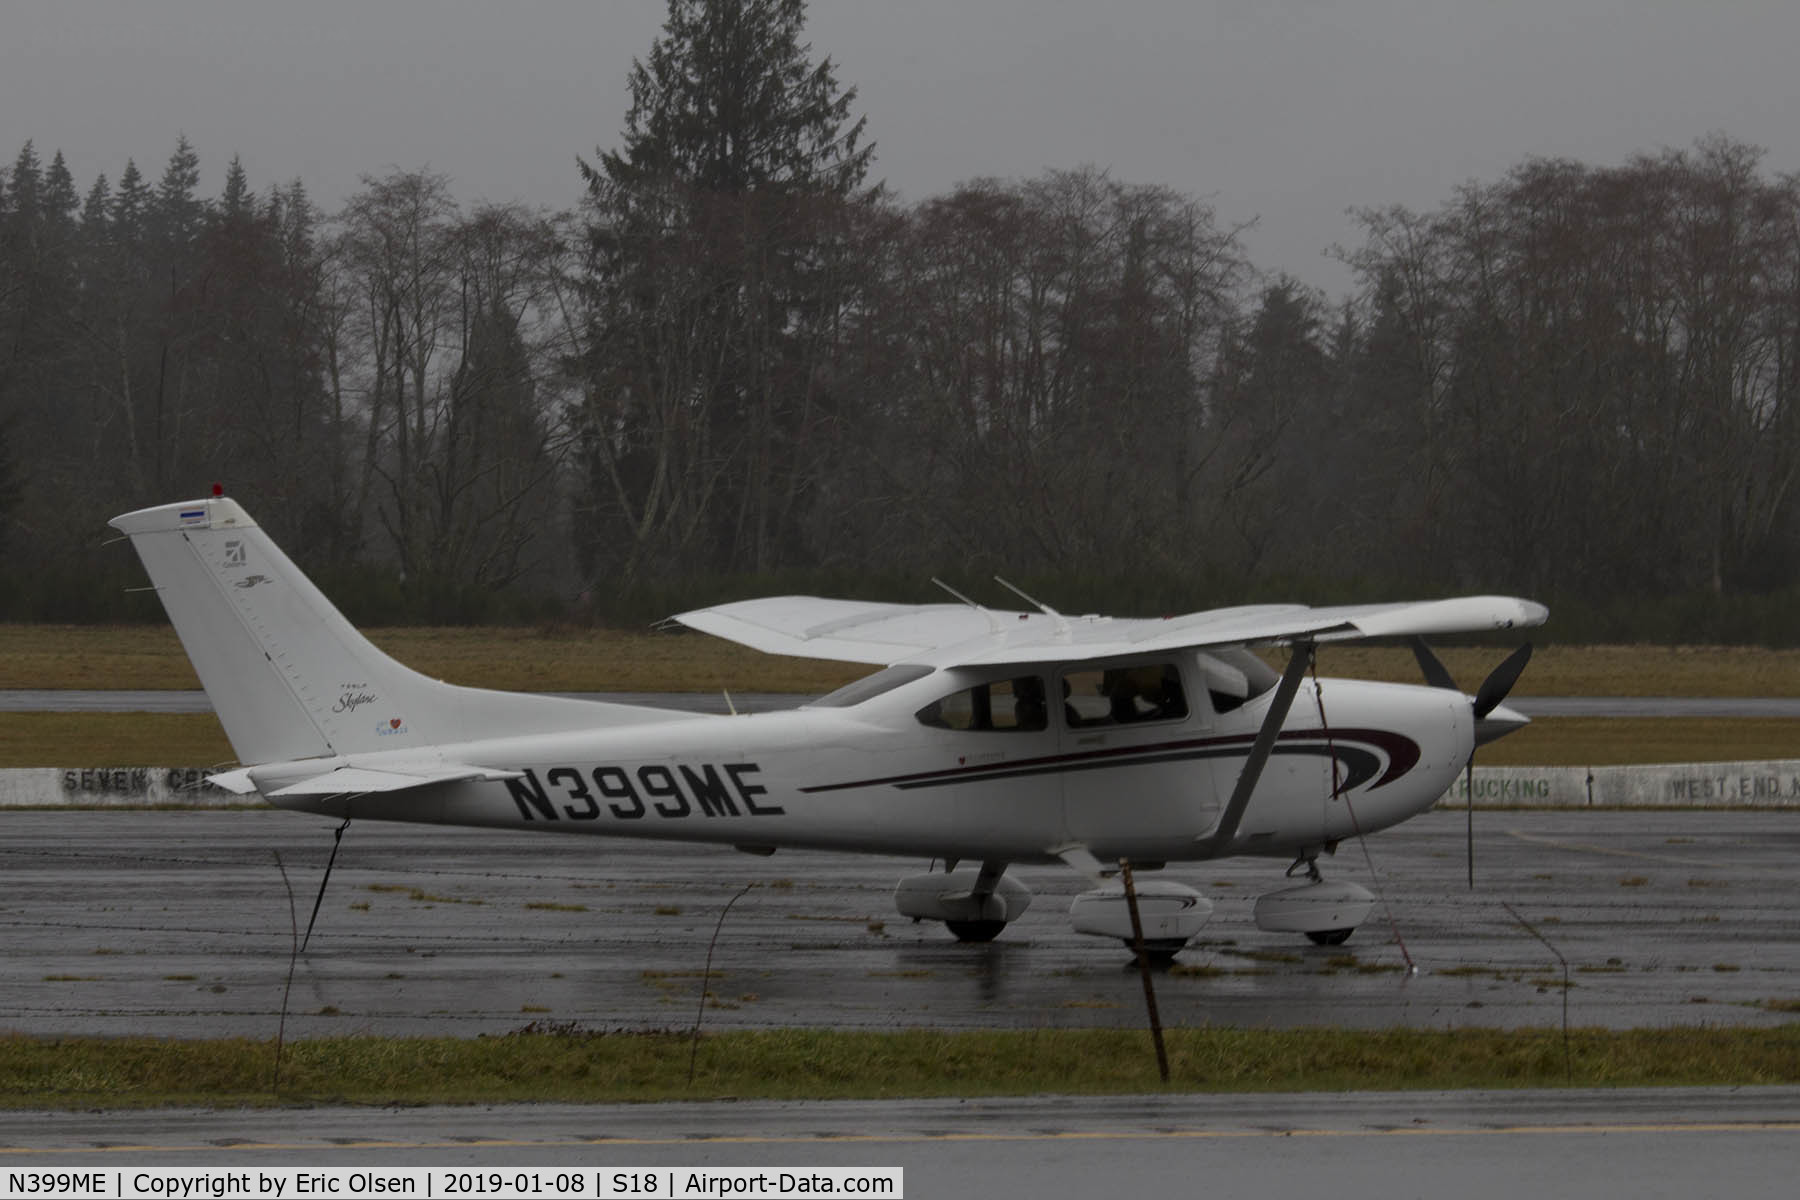 N399ME, 2000 Cessna 182S Skylane C/N 18280878, A Cessna 182 on a stormy day in Forks, WA.